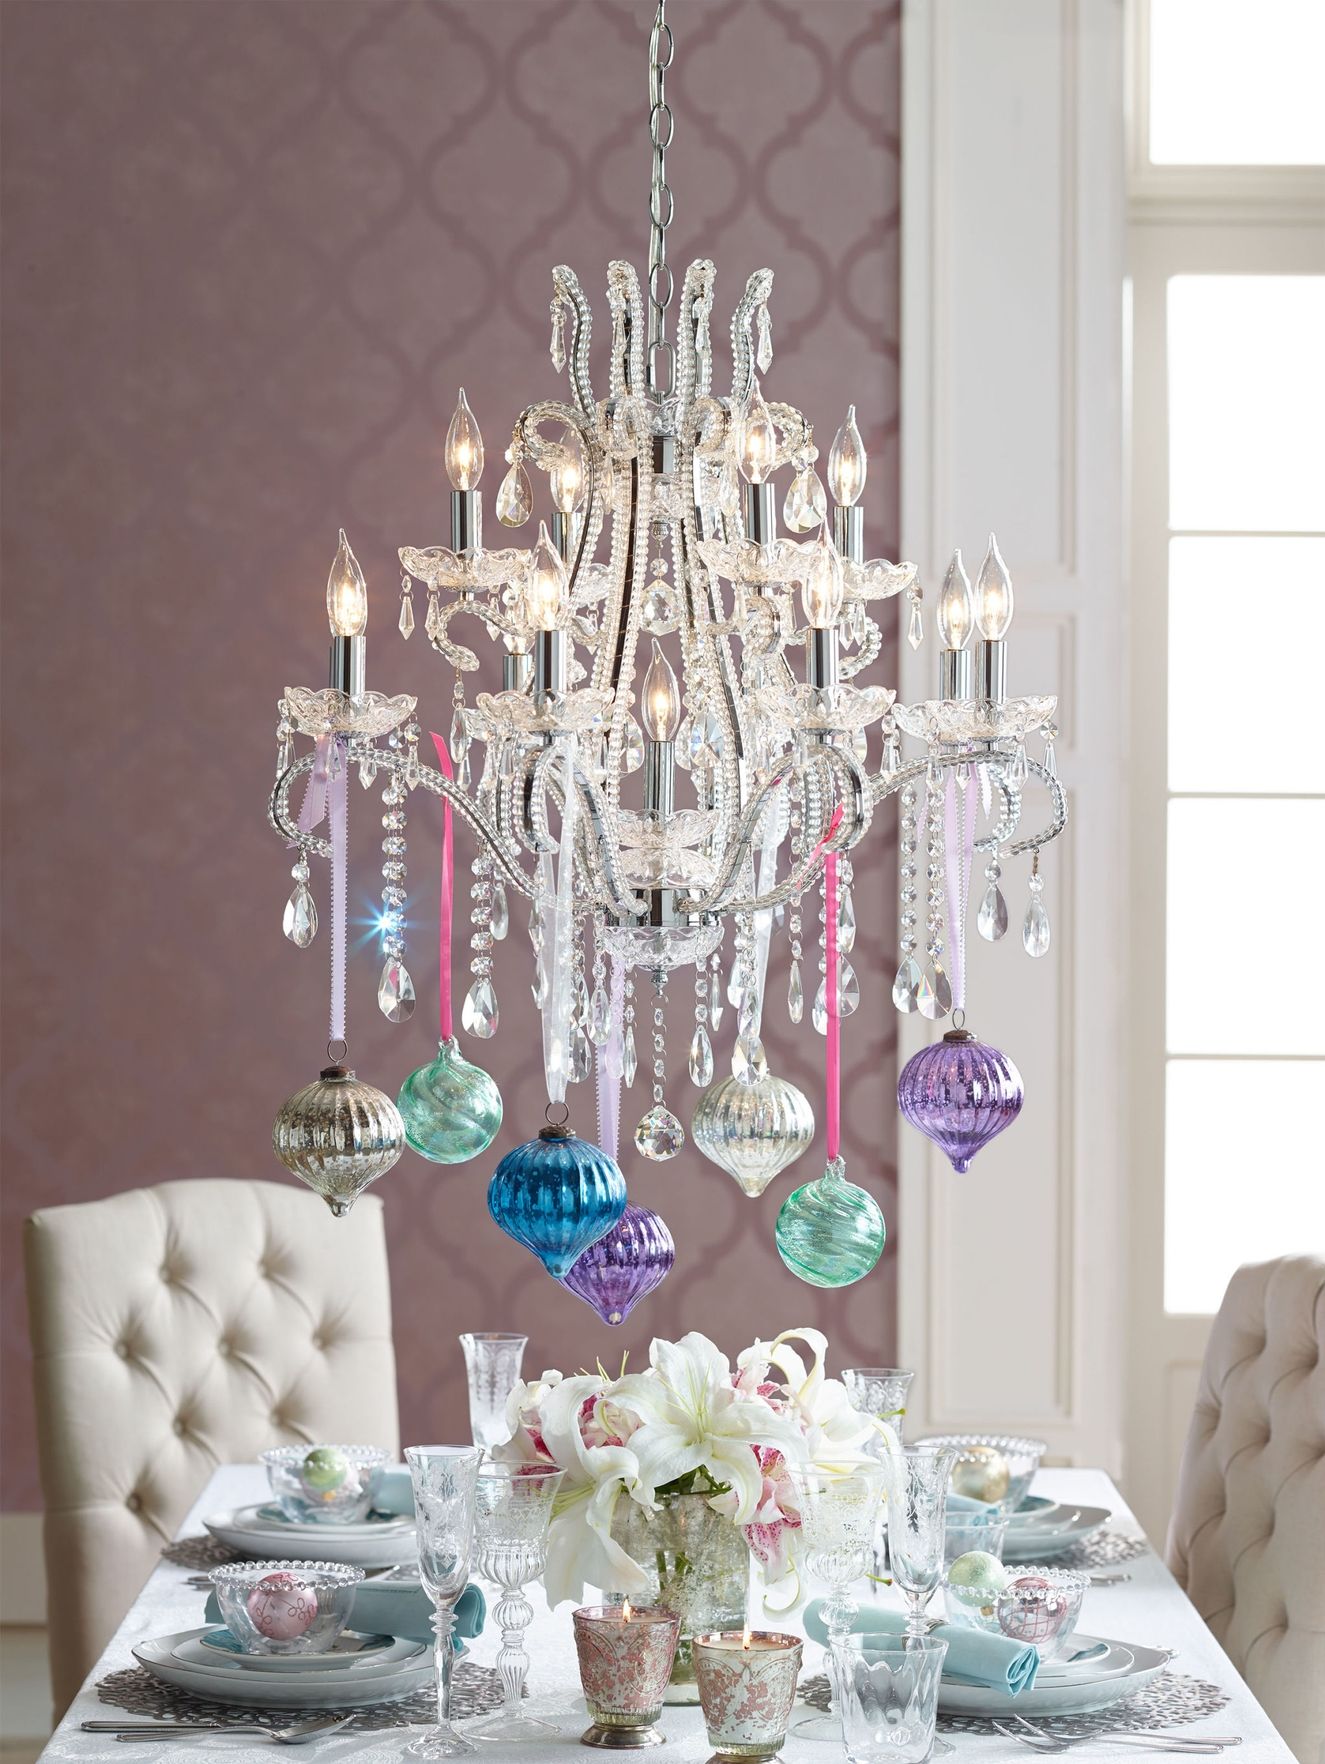 Gallery 1449526490 092214 Traditional Chandelier H2 Moodfit